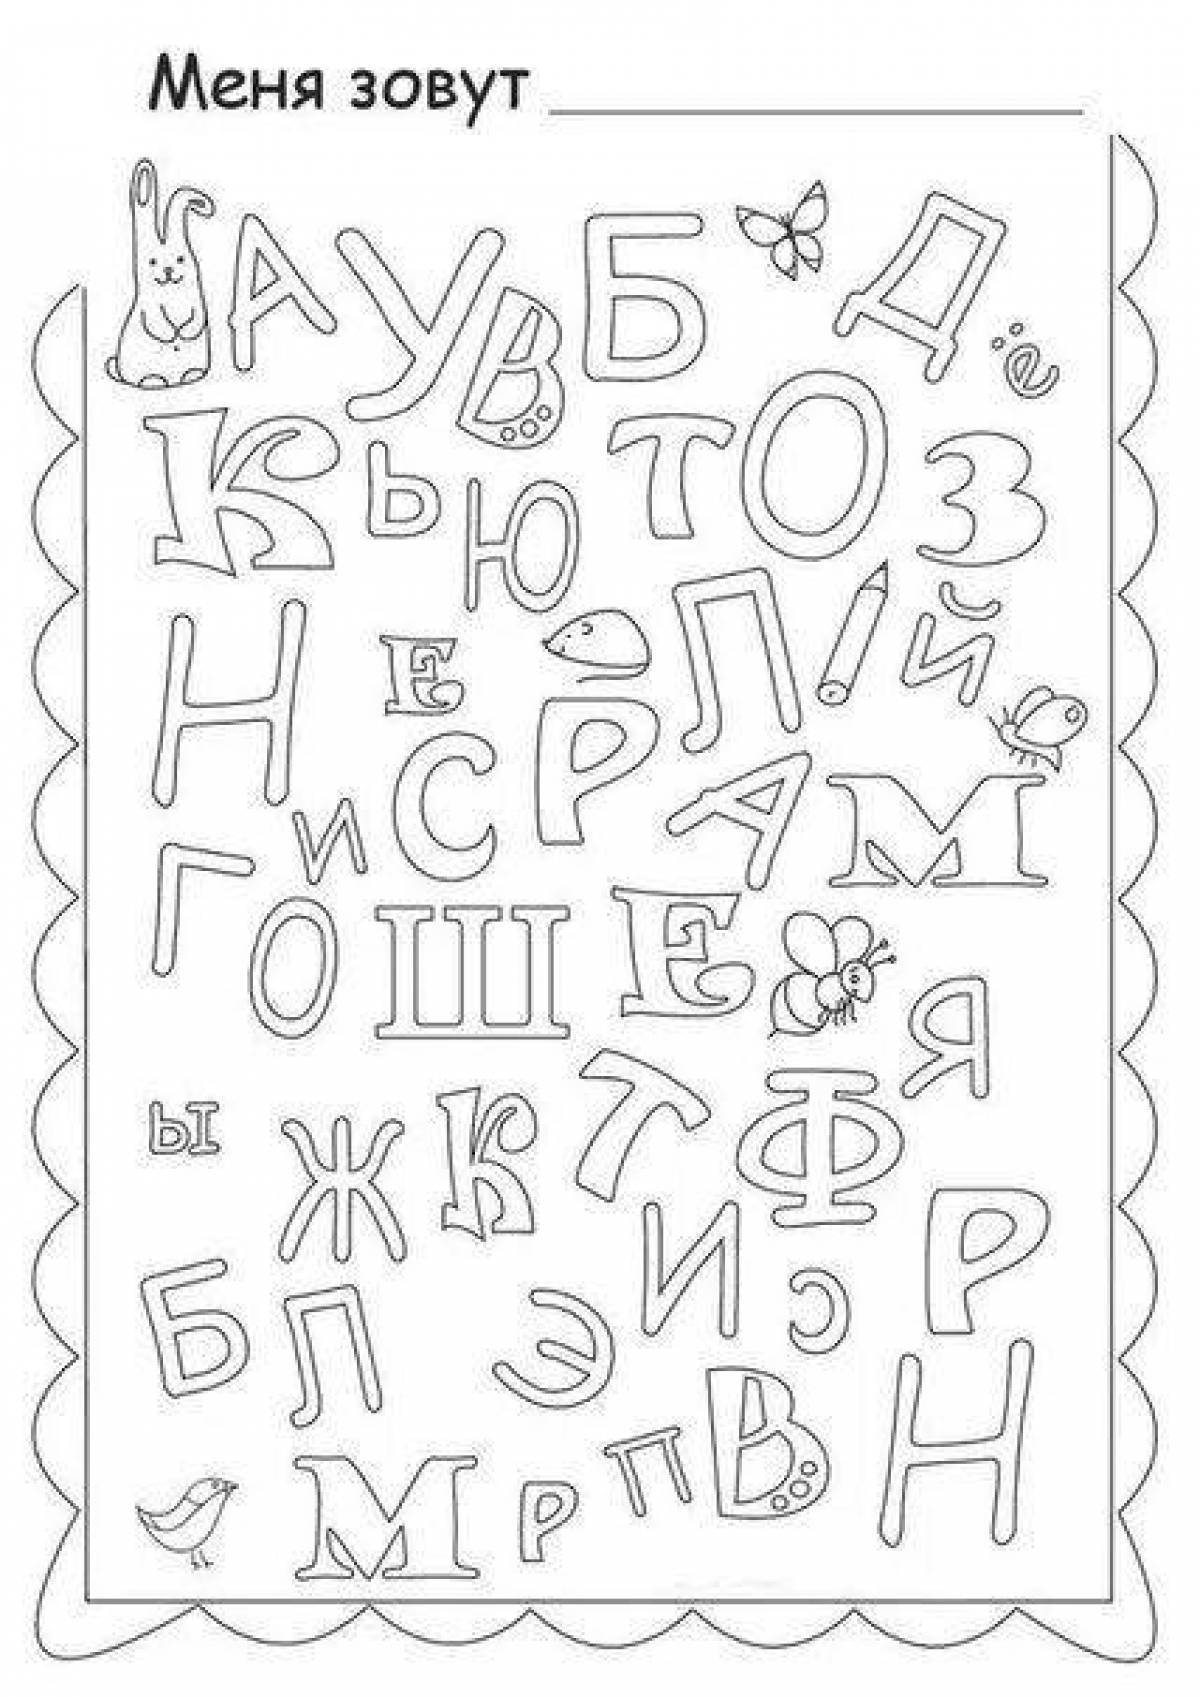 Coloring page of colorful vowels